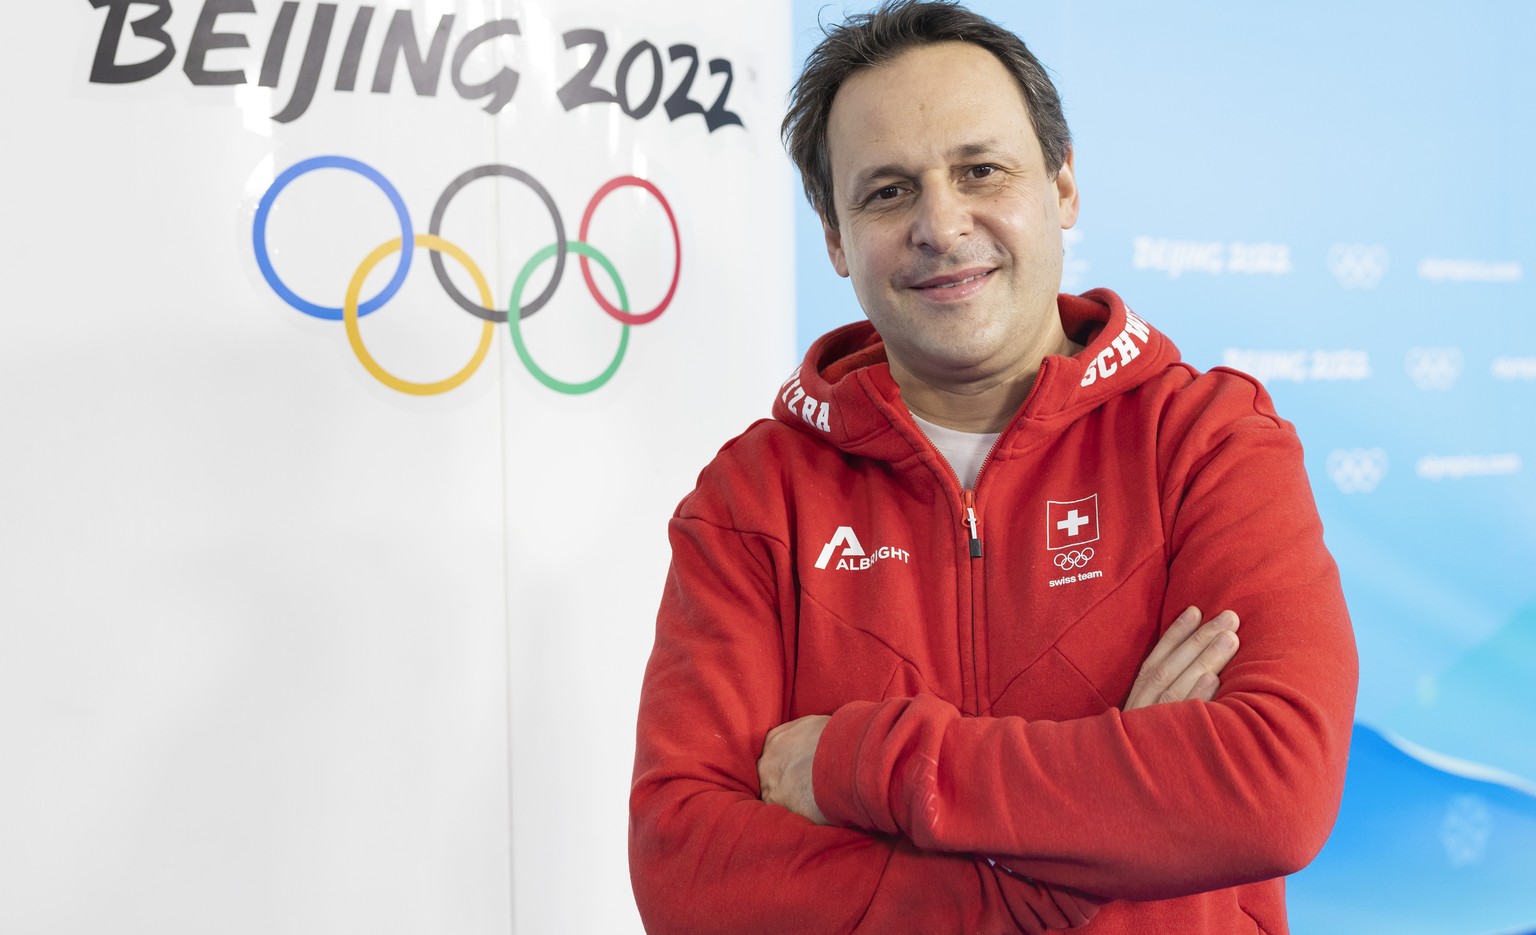 Swiss Olympic Chef de Mission Ralph Stoeckli poses for the photographer at the National Aquatics Centre at the 2022 Olympic Winter Games in Beijing, China, on Saturday, February 19, 2022. (KEYSTONE/Sa ...